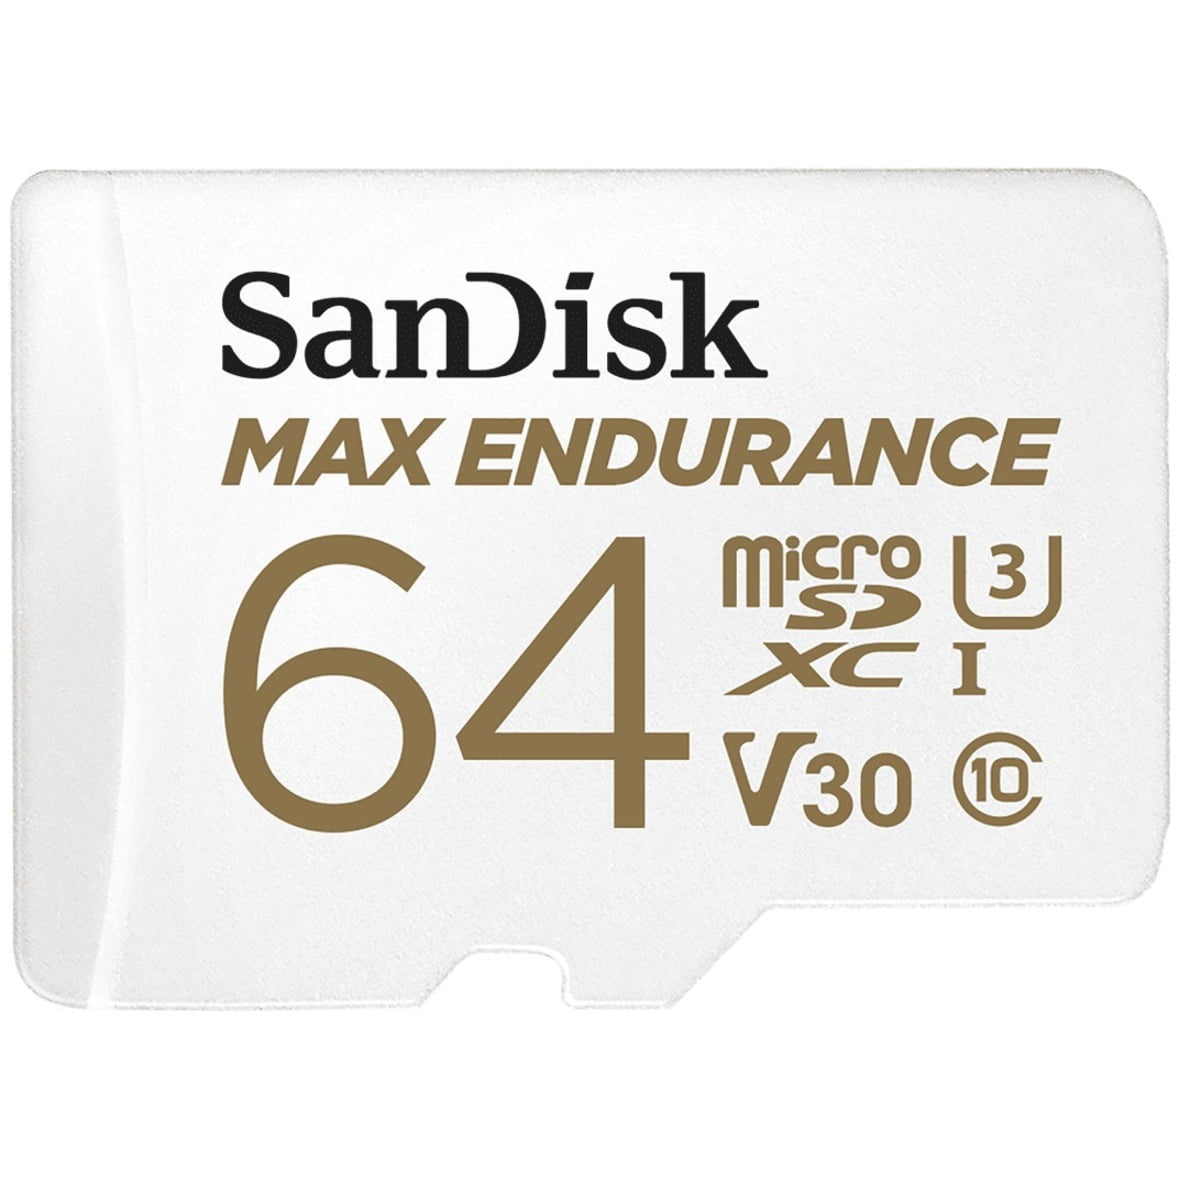 100MBs A1 U1 Works with SanDisk SanDisk Ultra 128GB MicroSDXC Verified for Canon VIXIA HF R500 Black by SanFlash